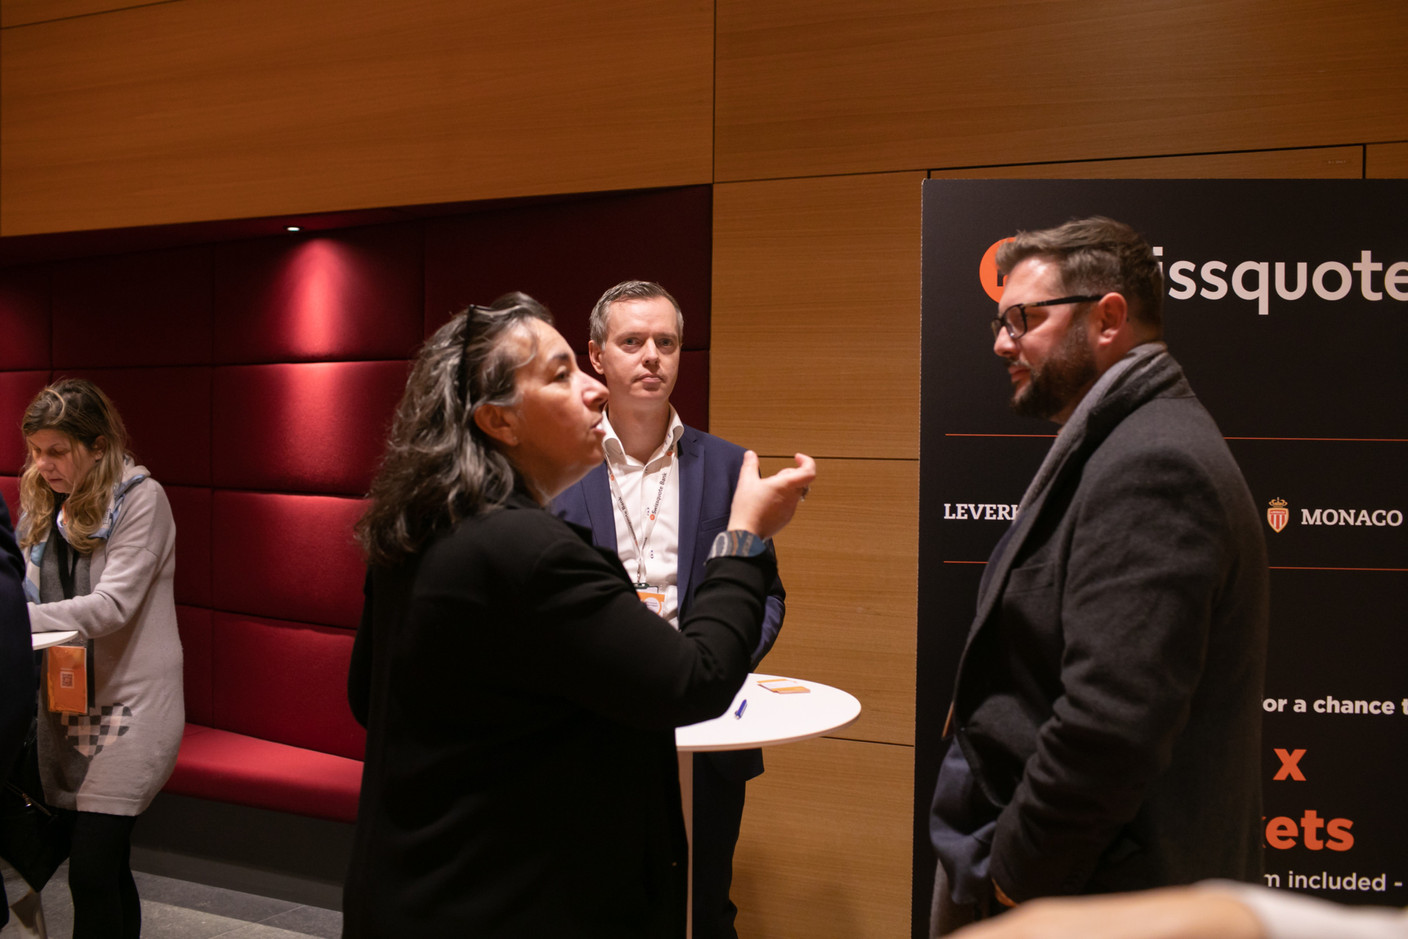 Finance experts on 19 January gathered for Swissquote’s first Investment Day conference to discuss the challenges and opportunities ahead for 2023 and beyond.  Matic Zorman / Maison Moderne